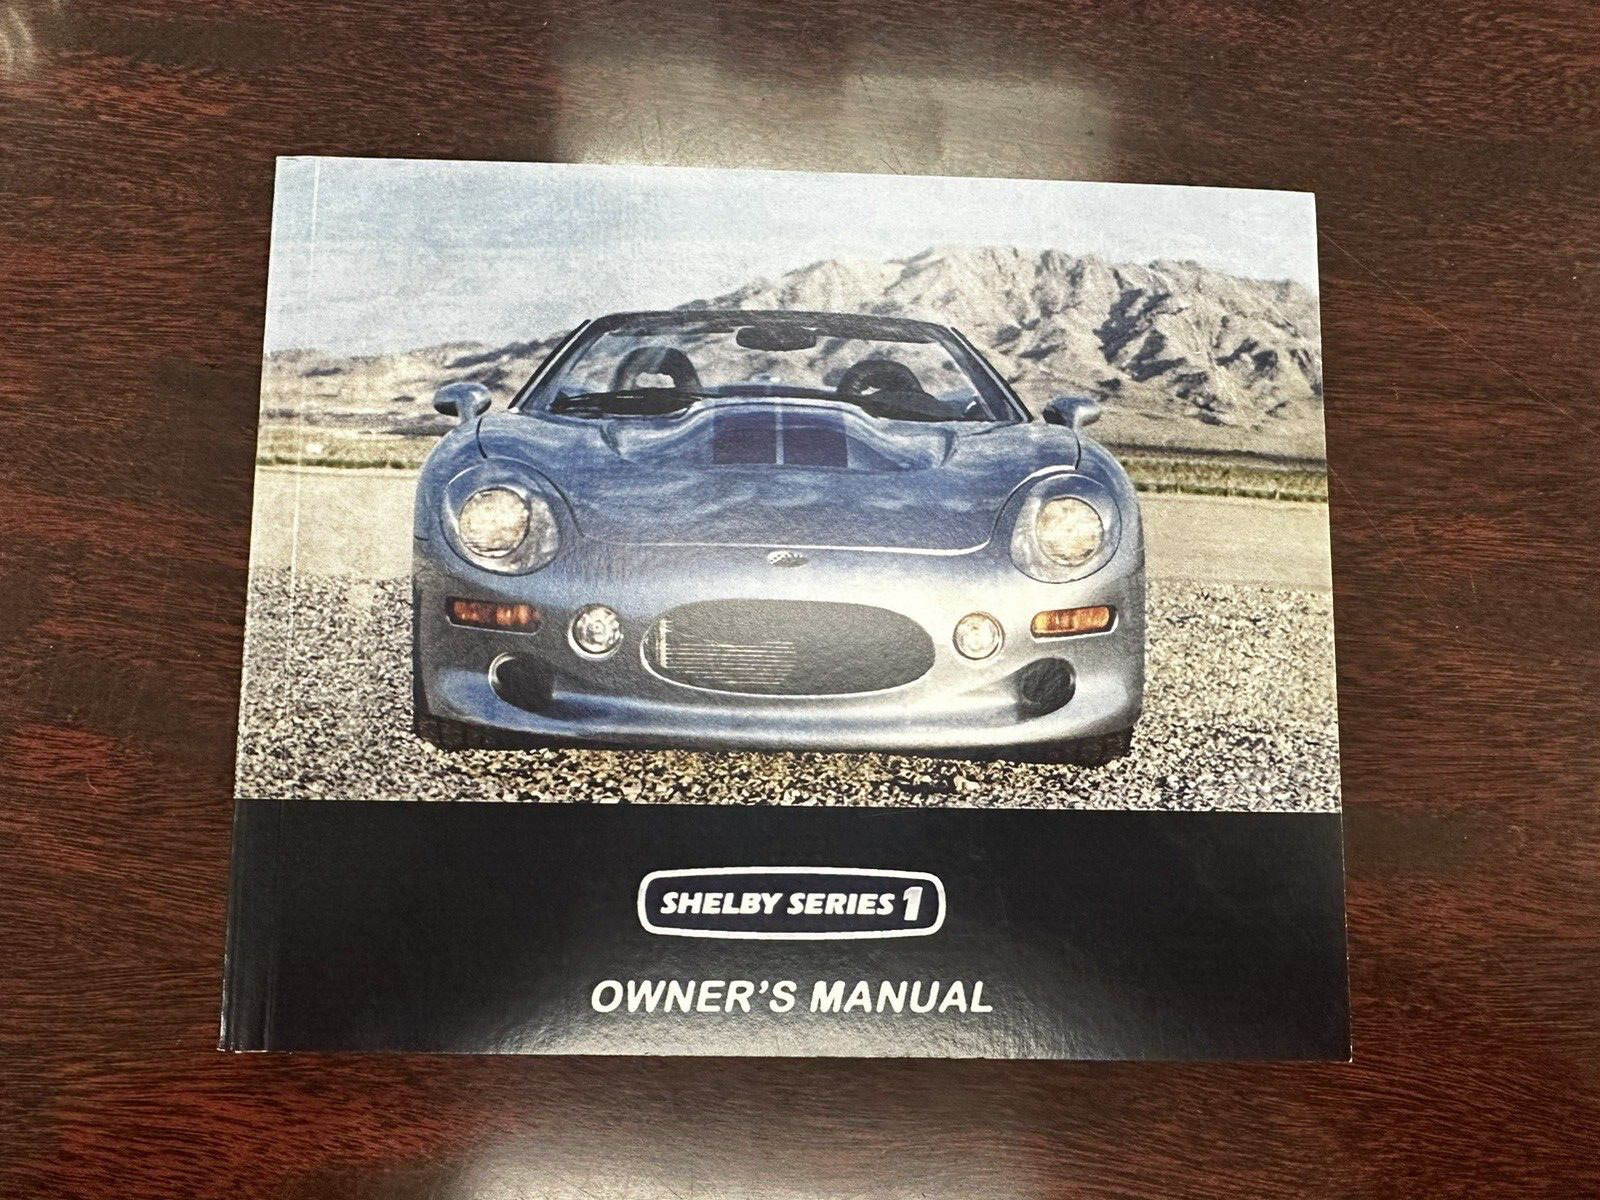 1999 SHELBY SERIES 1 OWNERS MANUAL CSX 5000 NOS RARE